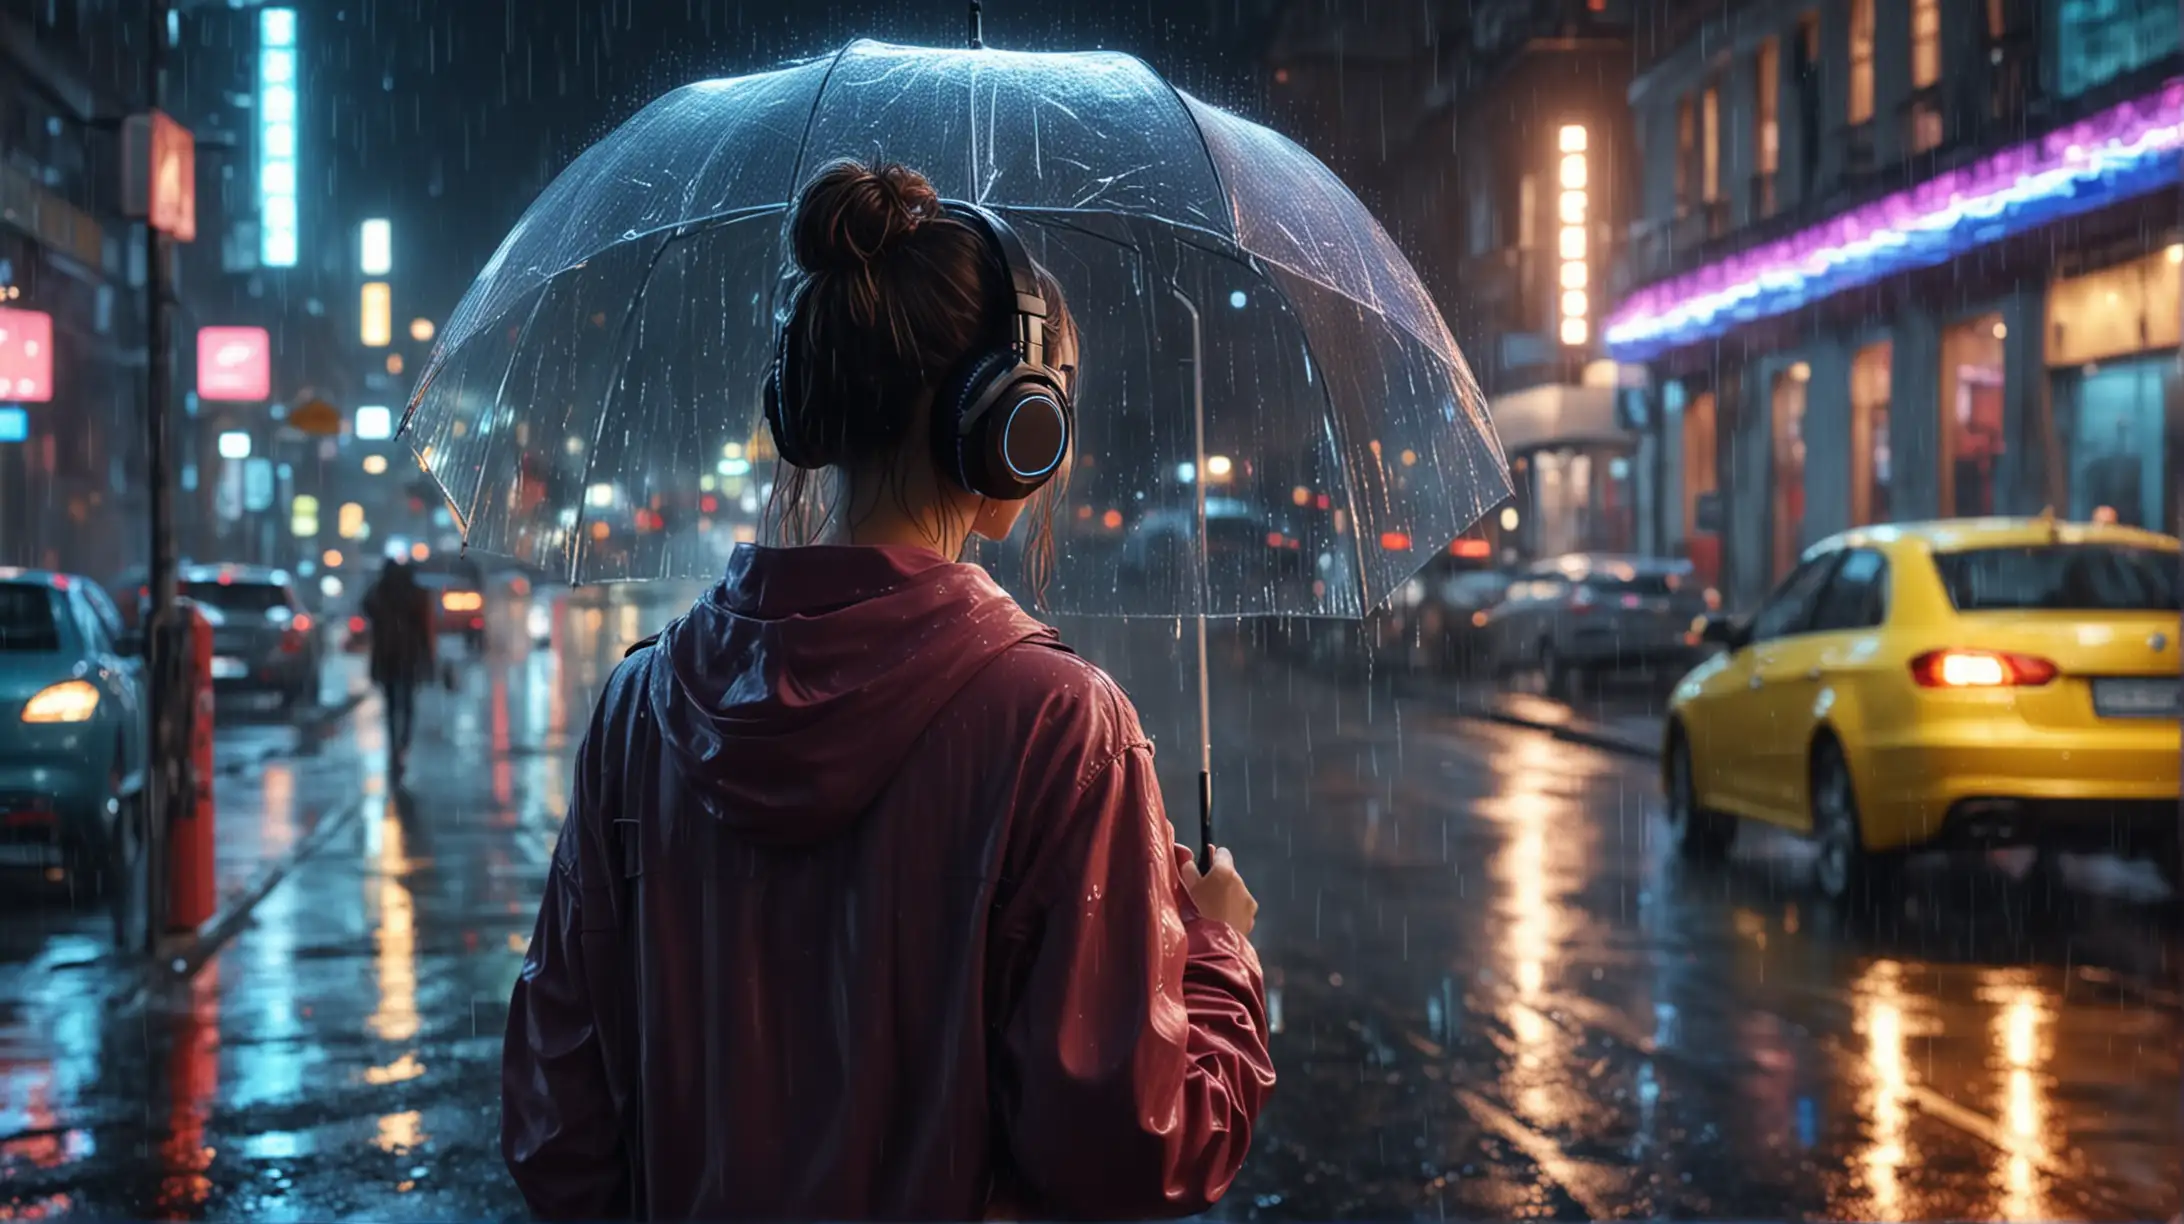 Girl with Headphones and Transparent Umbrella in Rainy Night Cityscape